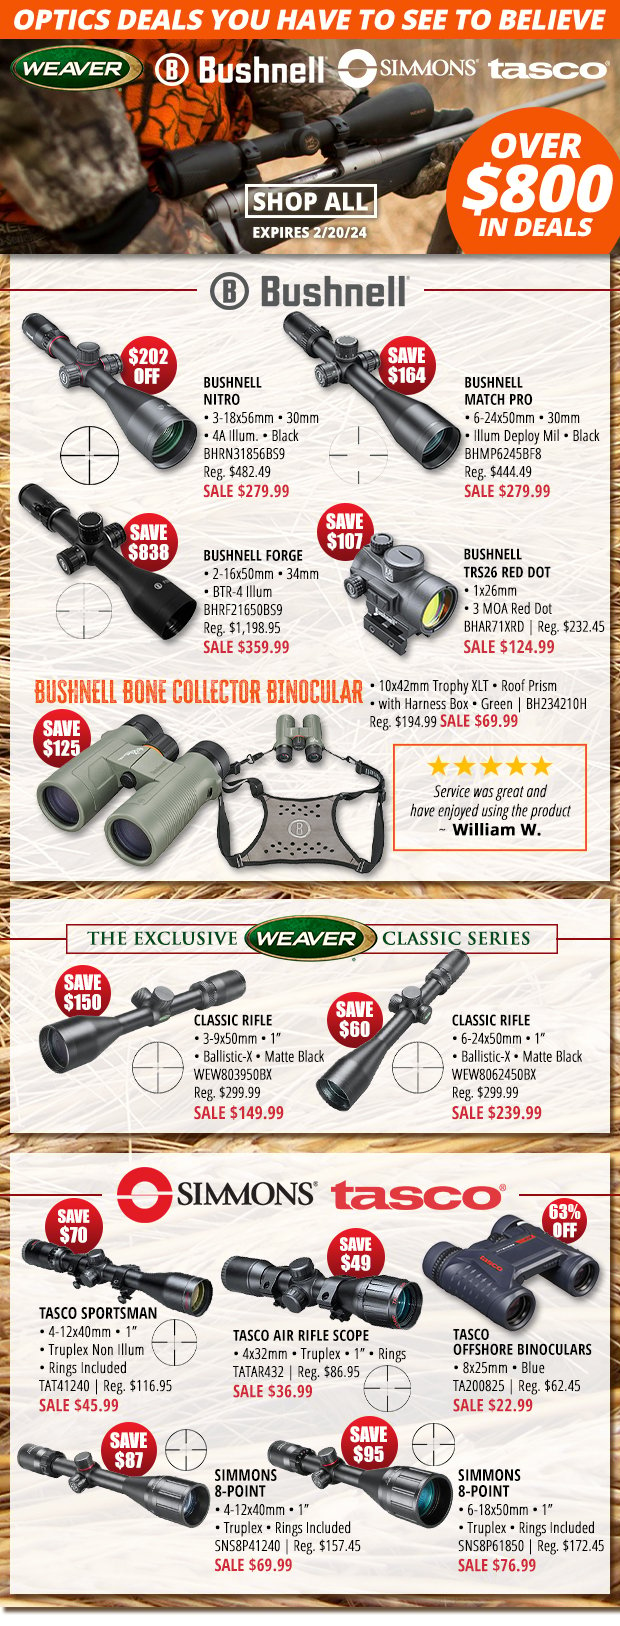 Over $800 Off on Optics Deals You Have to See to Believe!